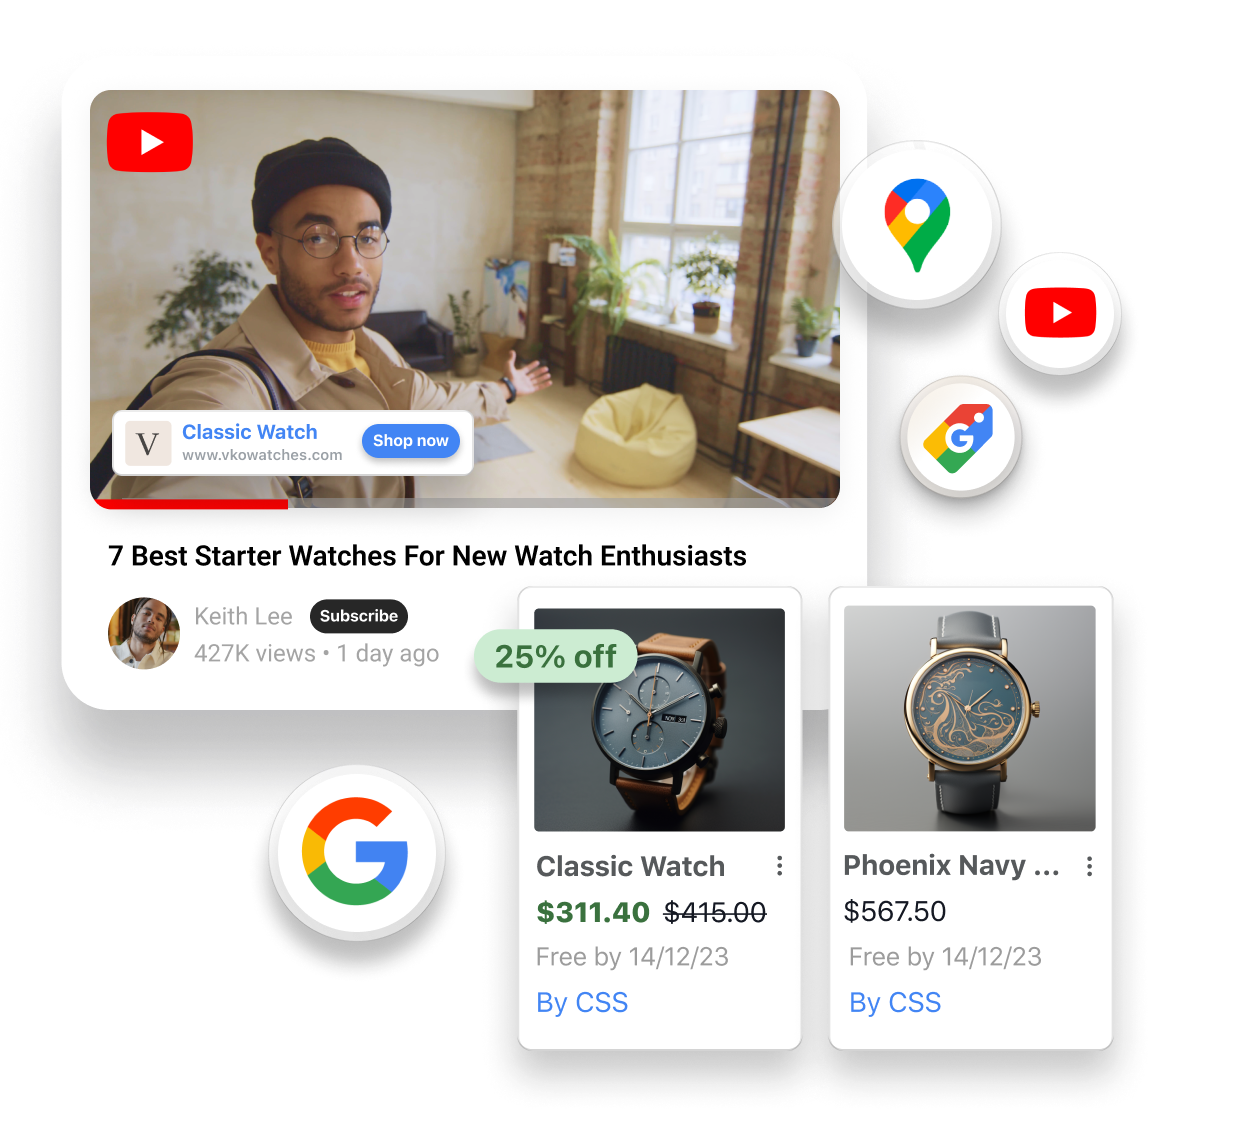 A YouTube video features a man wearing a brown watch on their wrist and talking into the camera. Product tiles that features two watches for sale it overlayed on the window of the video. Small logos overlayed around the windows include: Google, Google Maps, Google Shopping and YouTube.